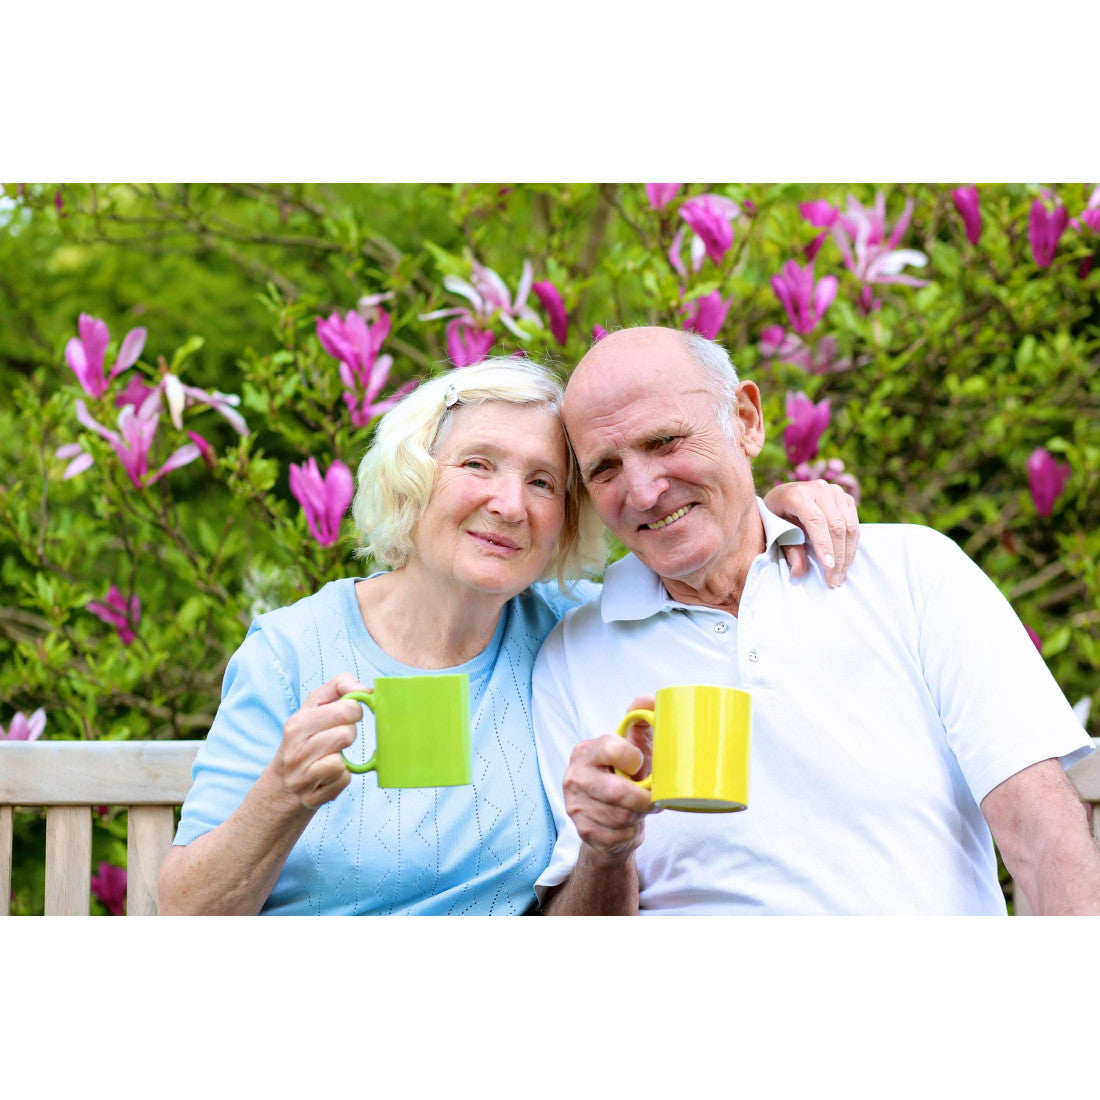 Elderly couple smiling, holding coffee mugs of delicious, healthy,  Ma' Cline's Coffee,  sitting on a bench in front of a blooming shrub with purple flowers.